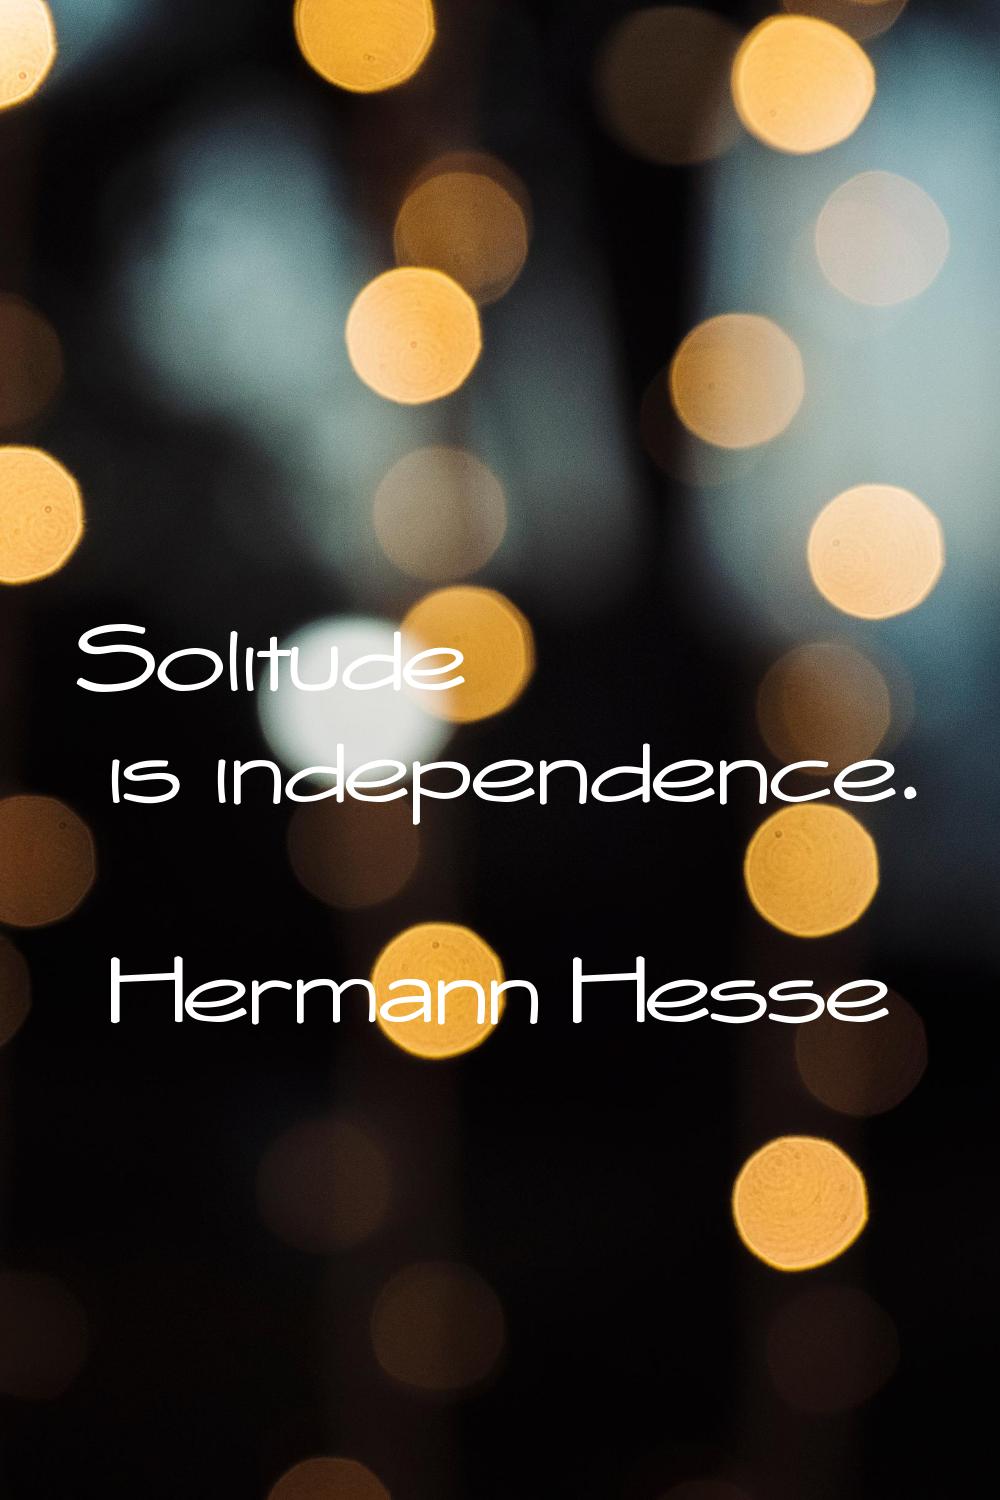 Solitude is independence.